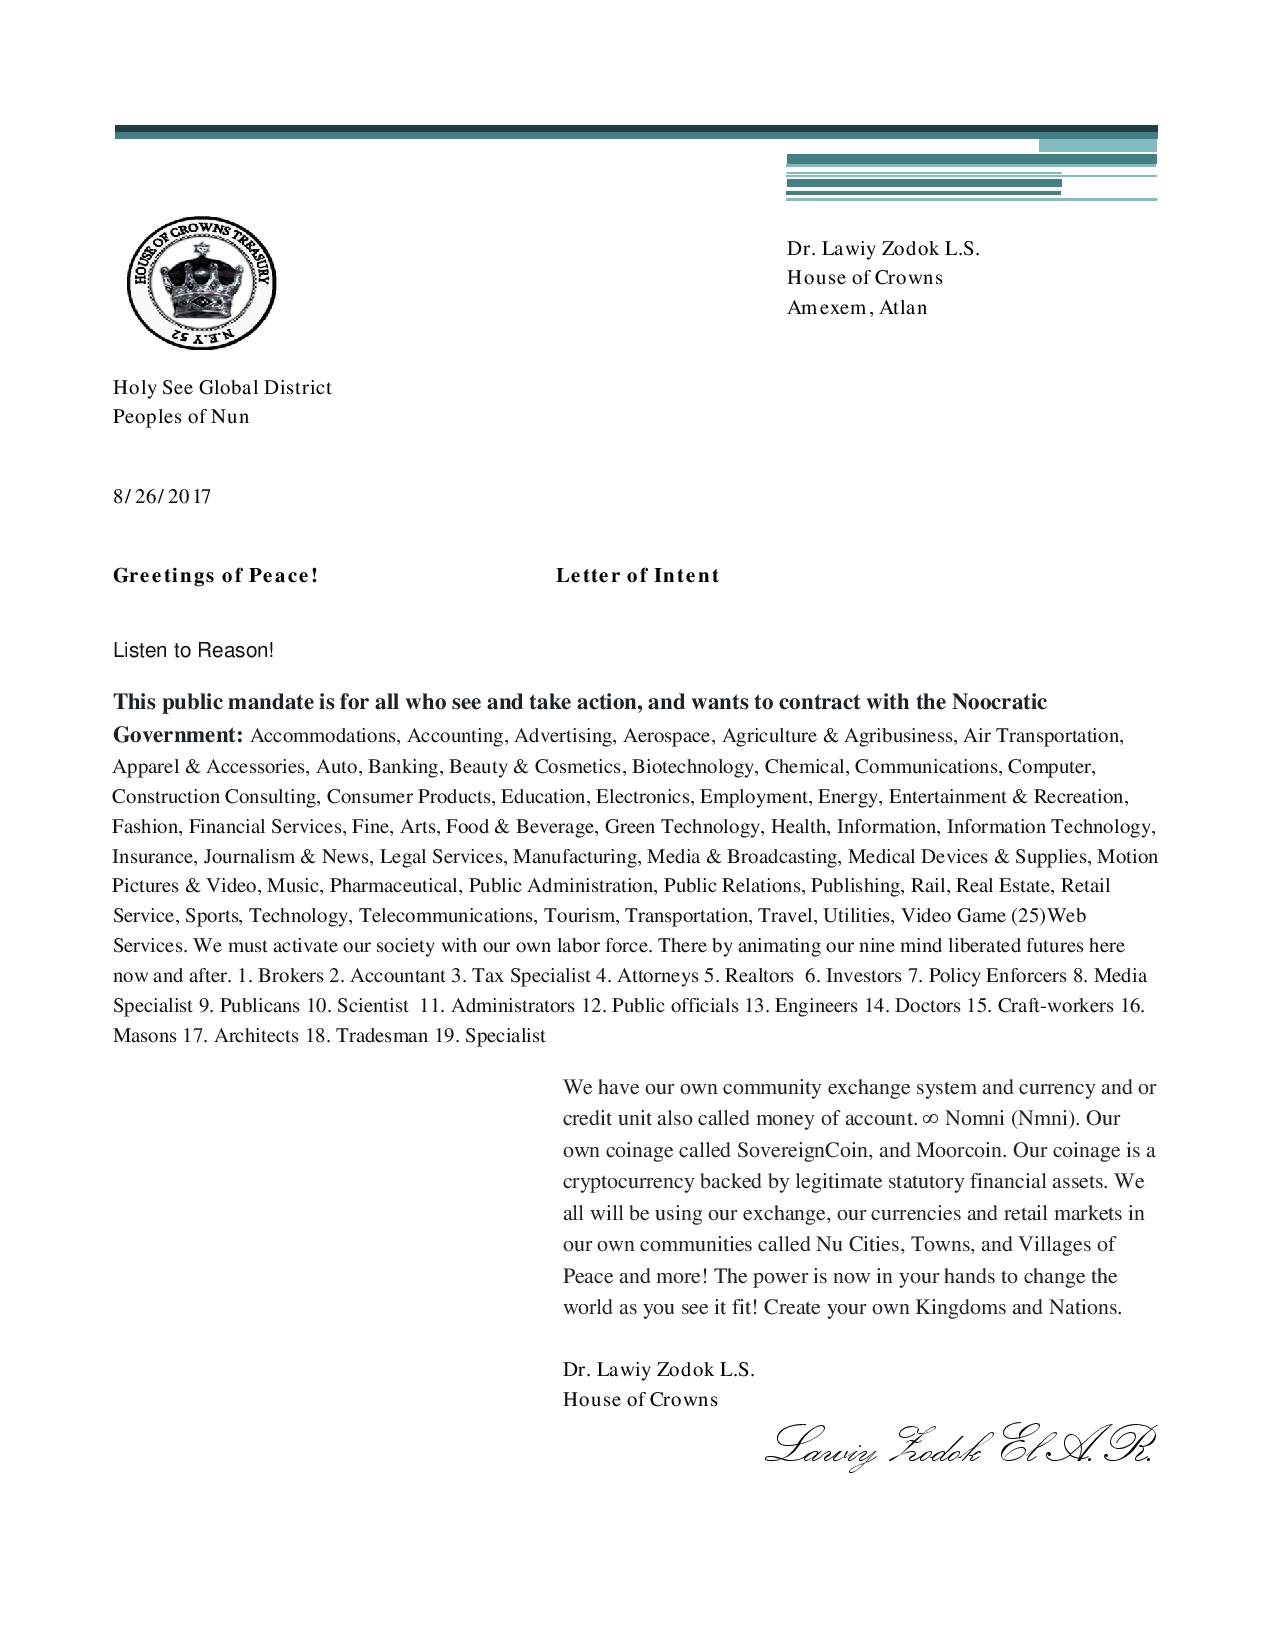 Holy See Global District Letter of Intent-page-001.jpg